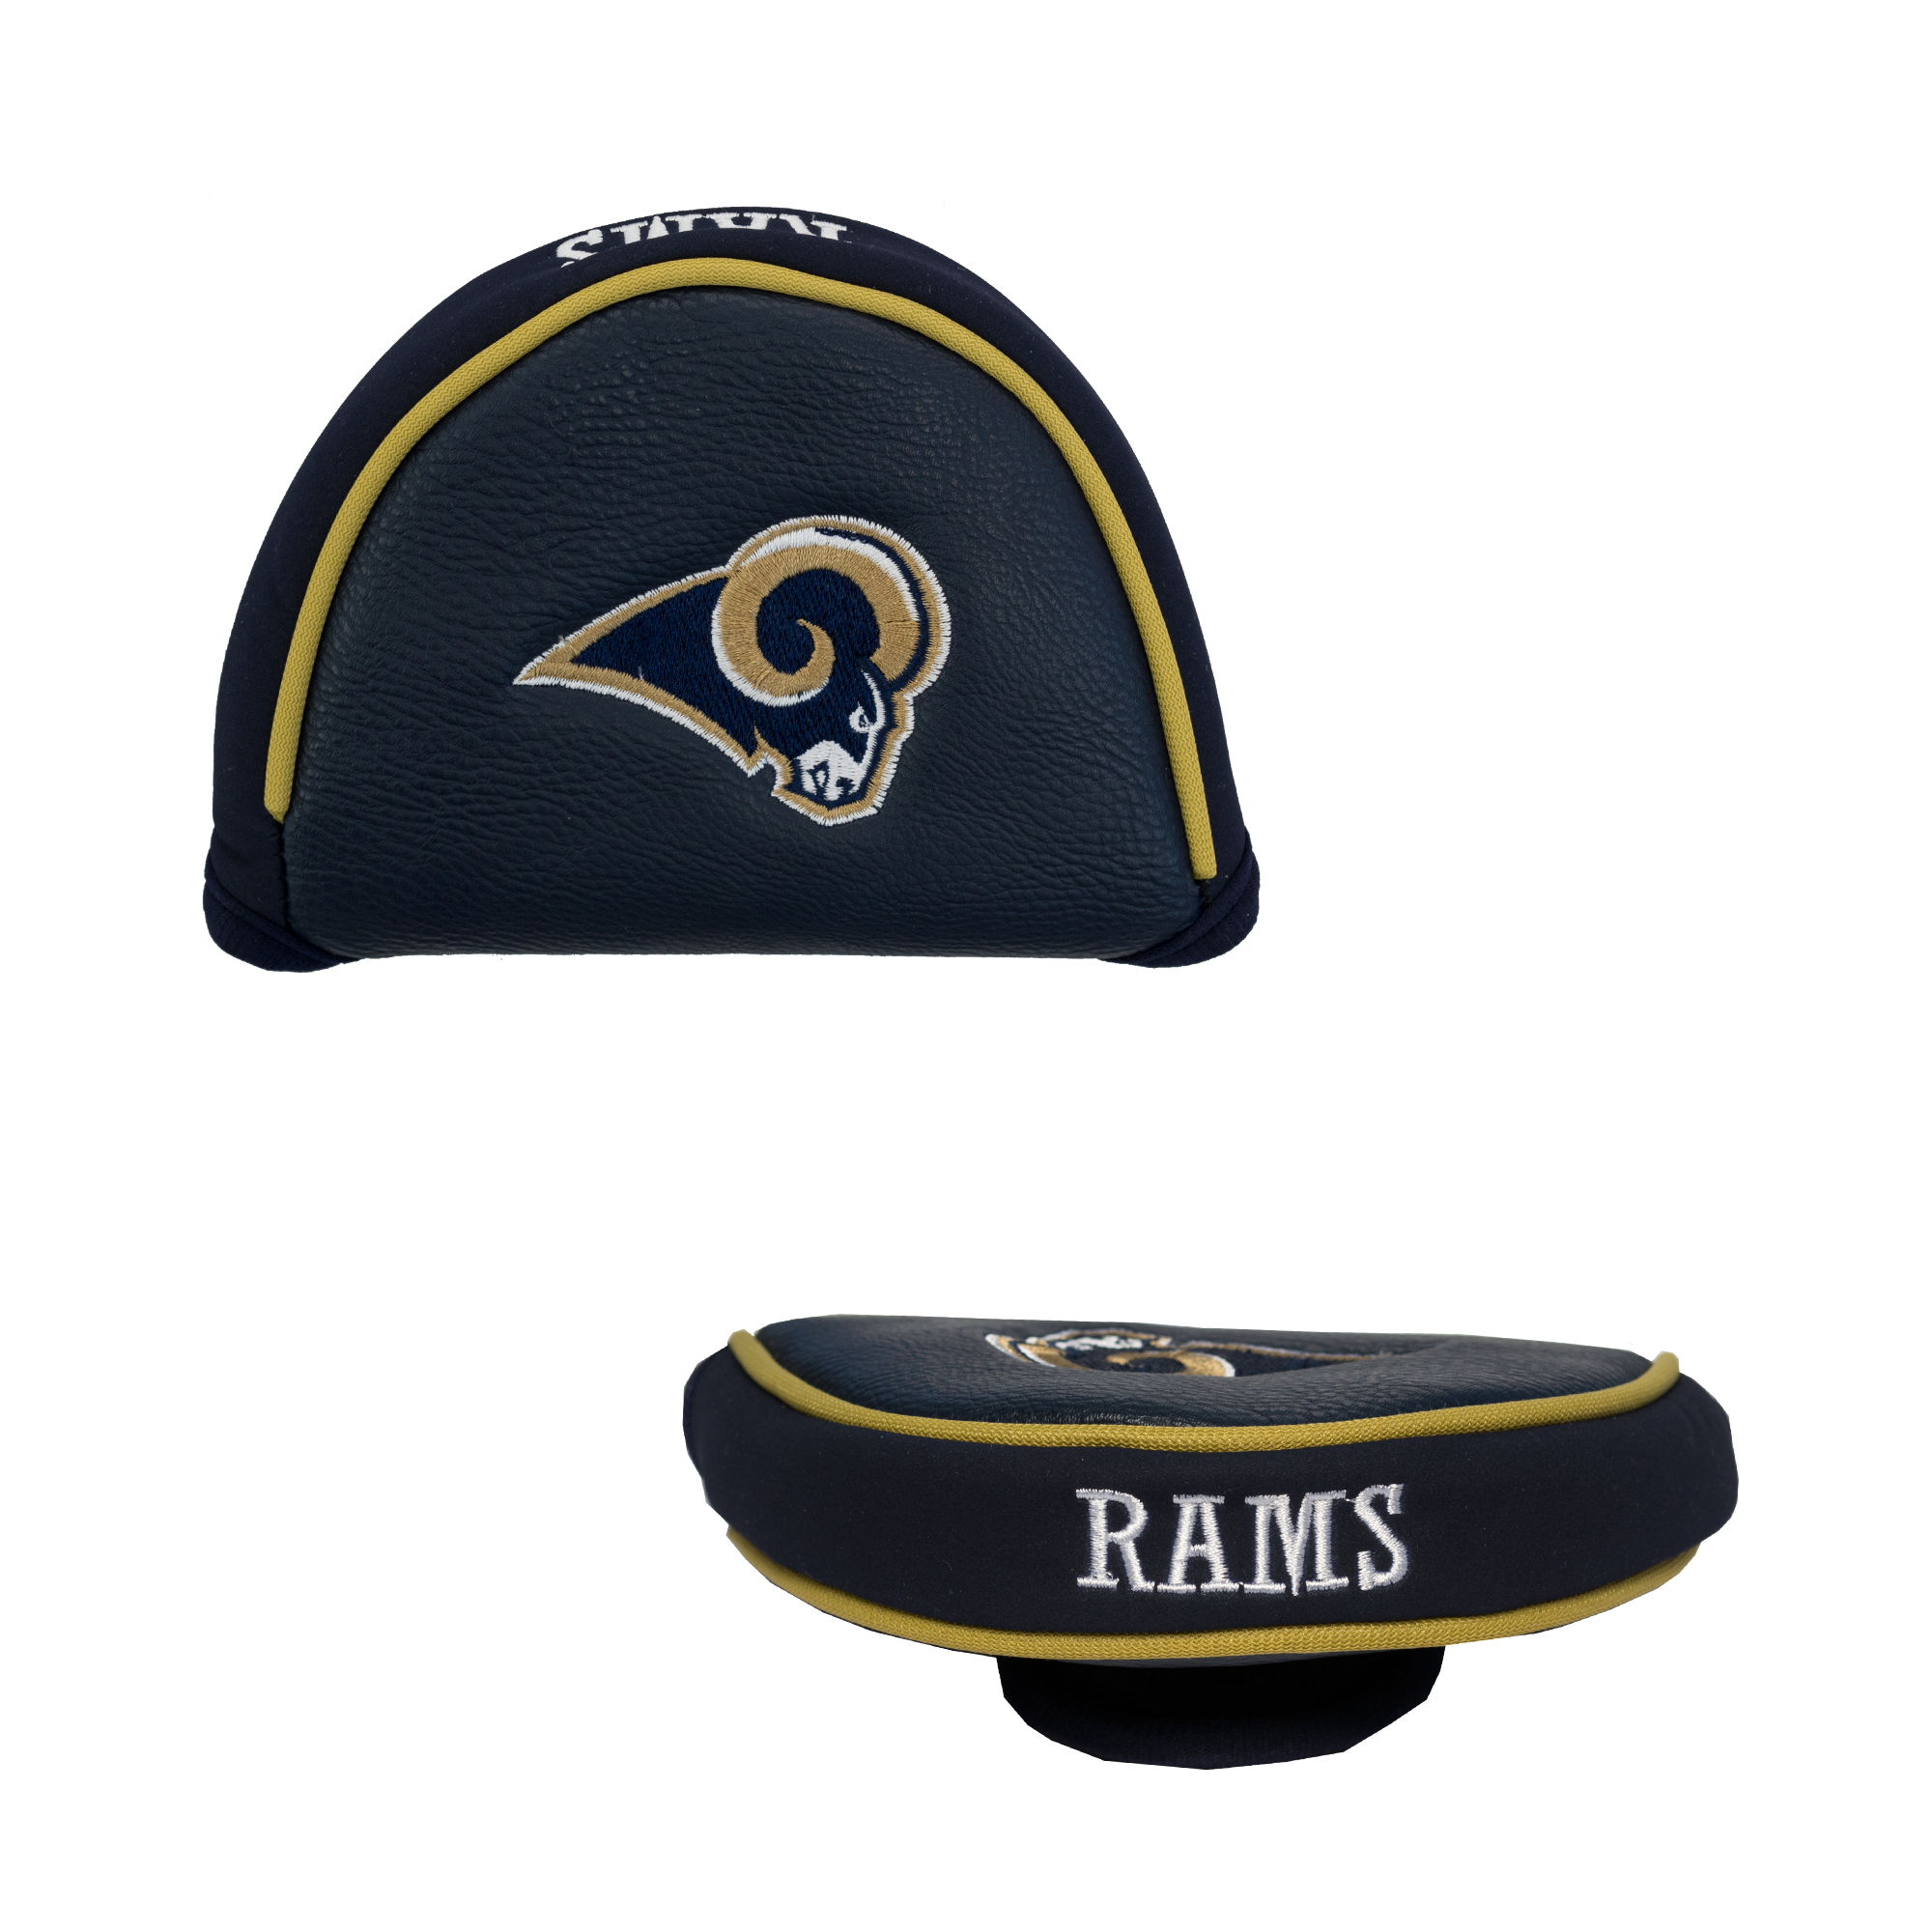 St. Louis Rams Mallet Putter Cover